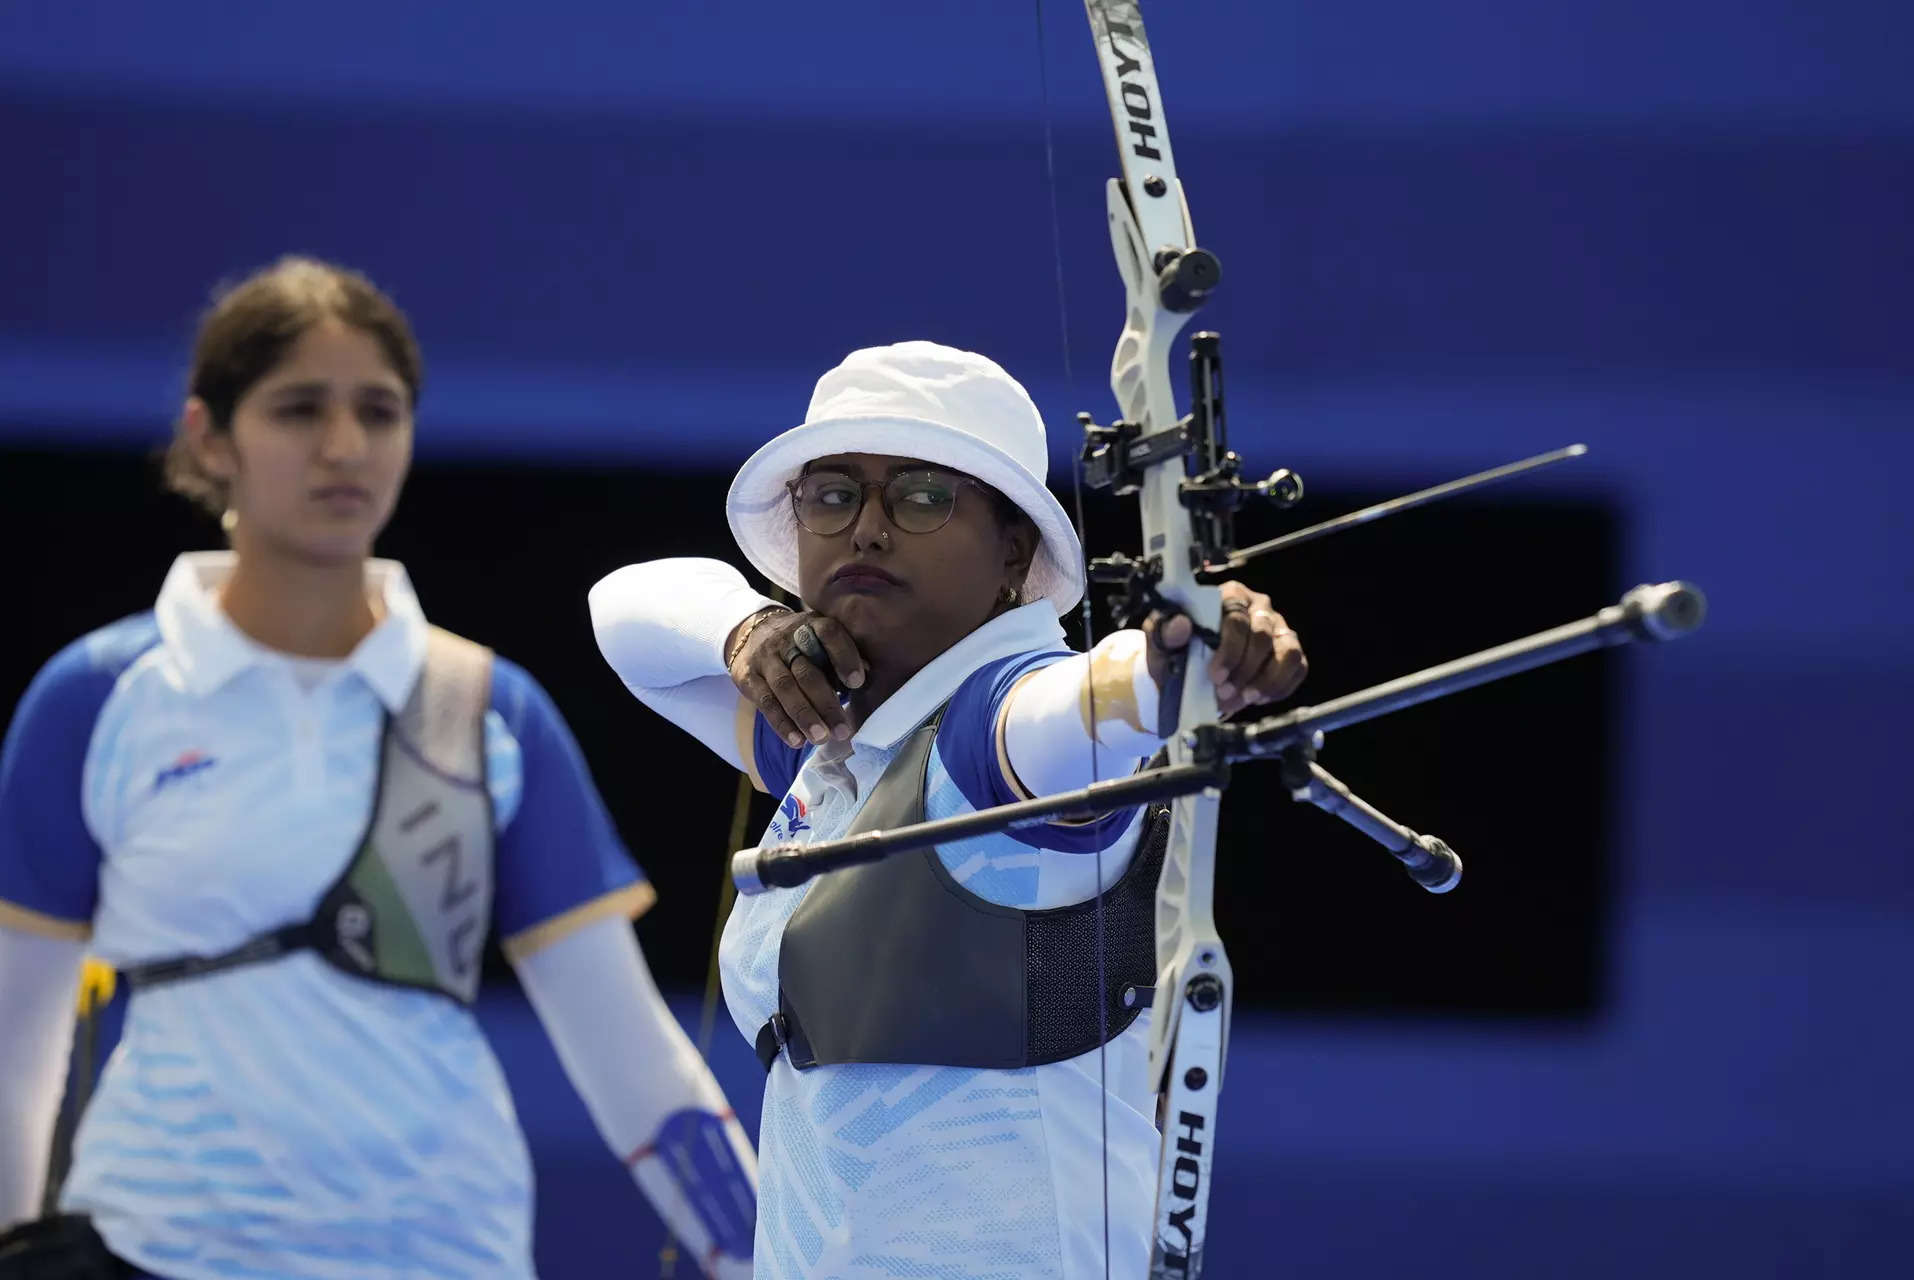 Fourth time unlucky, Archer Deepika Kumari comes under fire after crashing out of Paris Olympics, fans call her 'overhyped' 